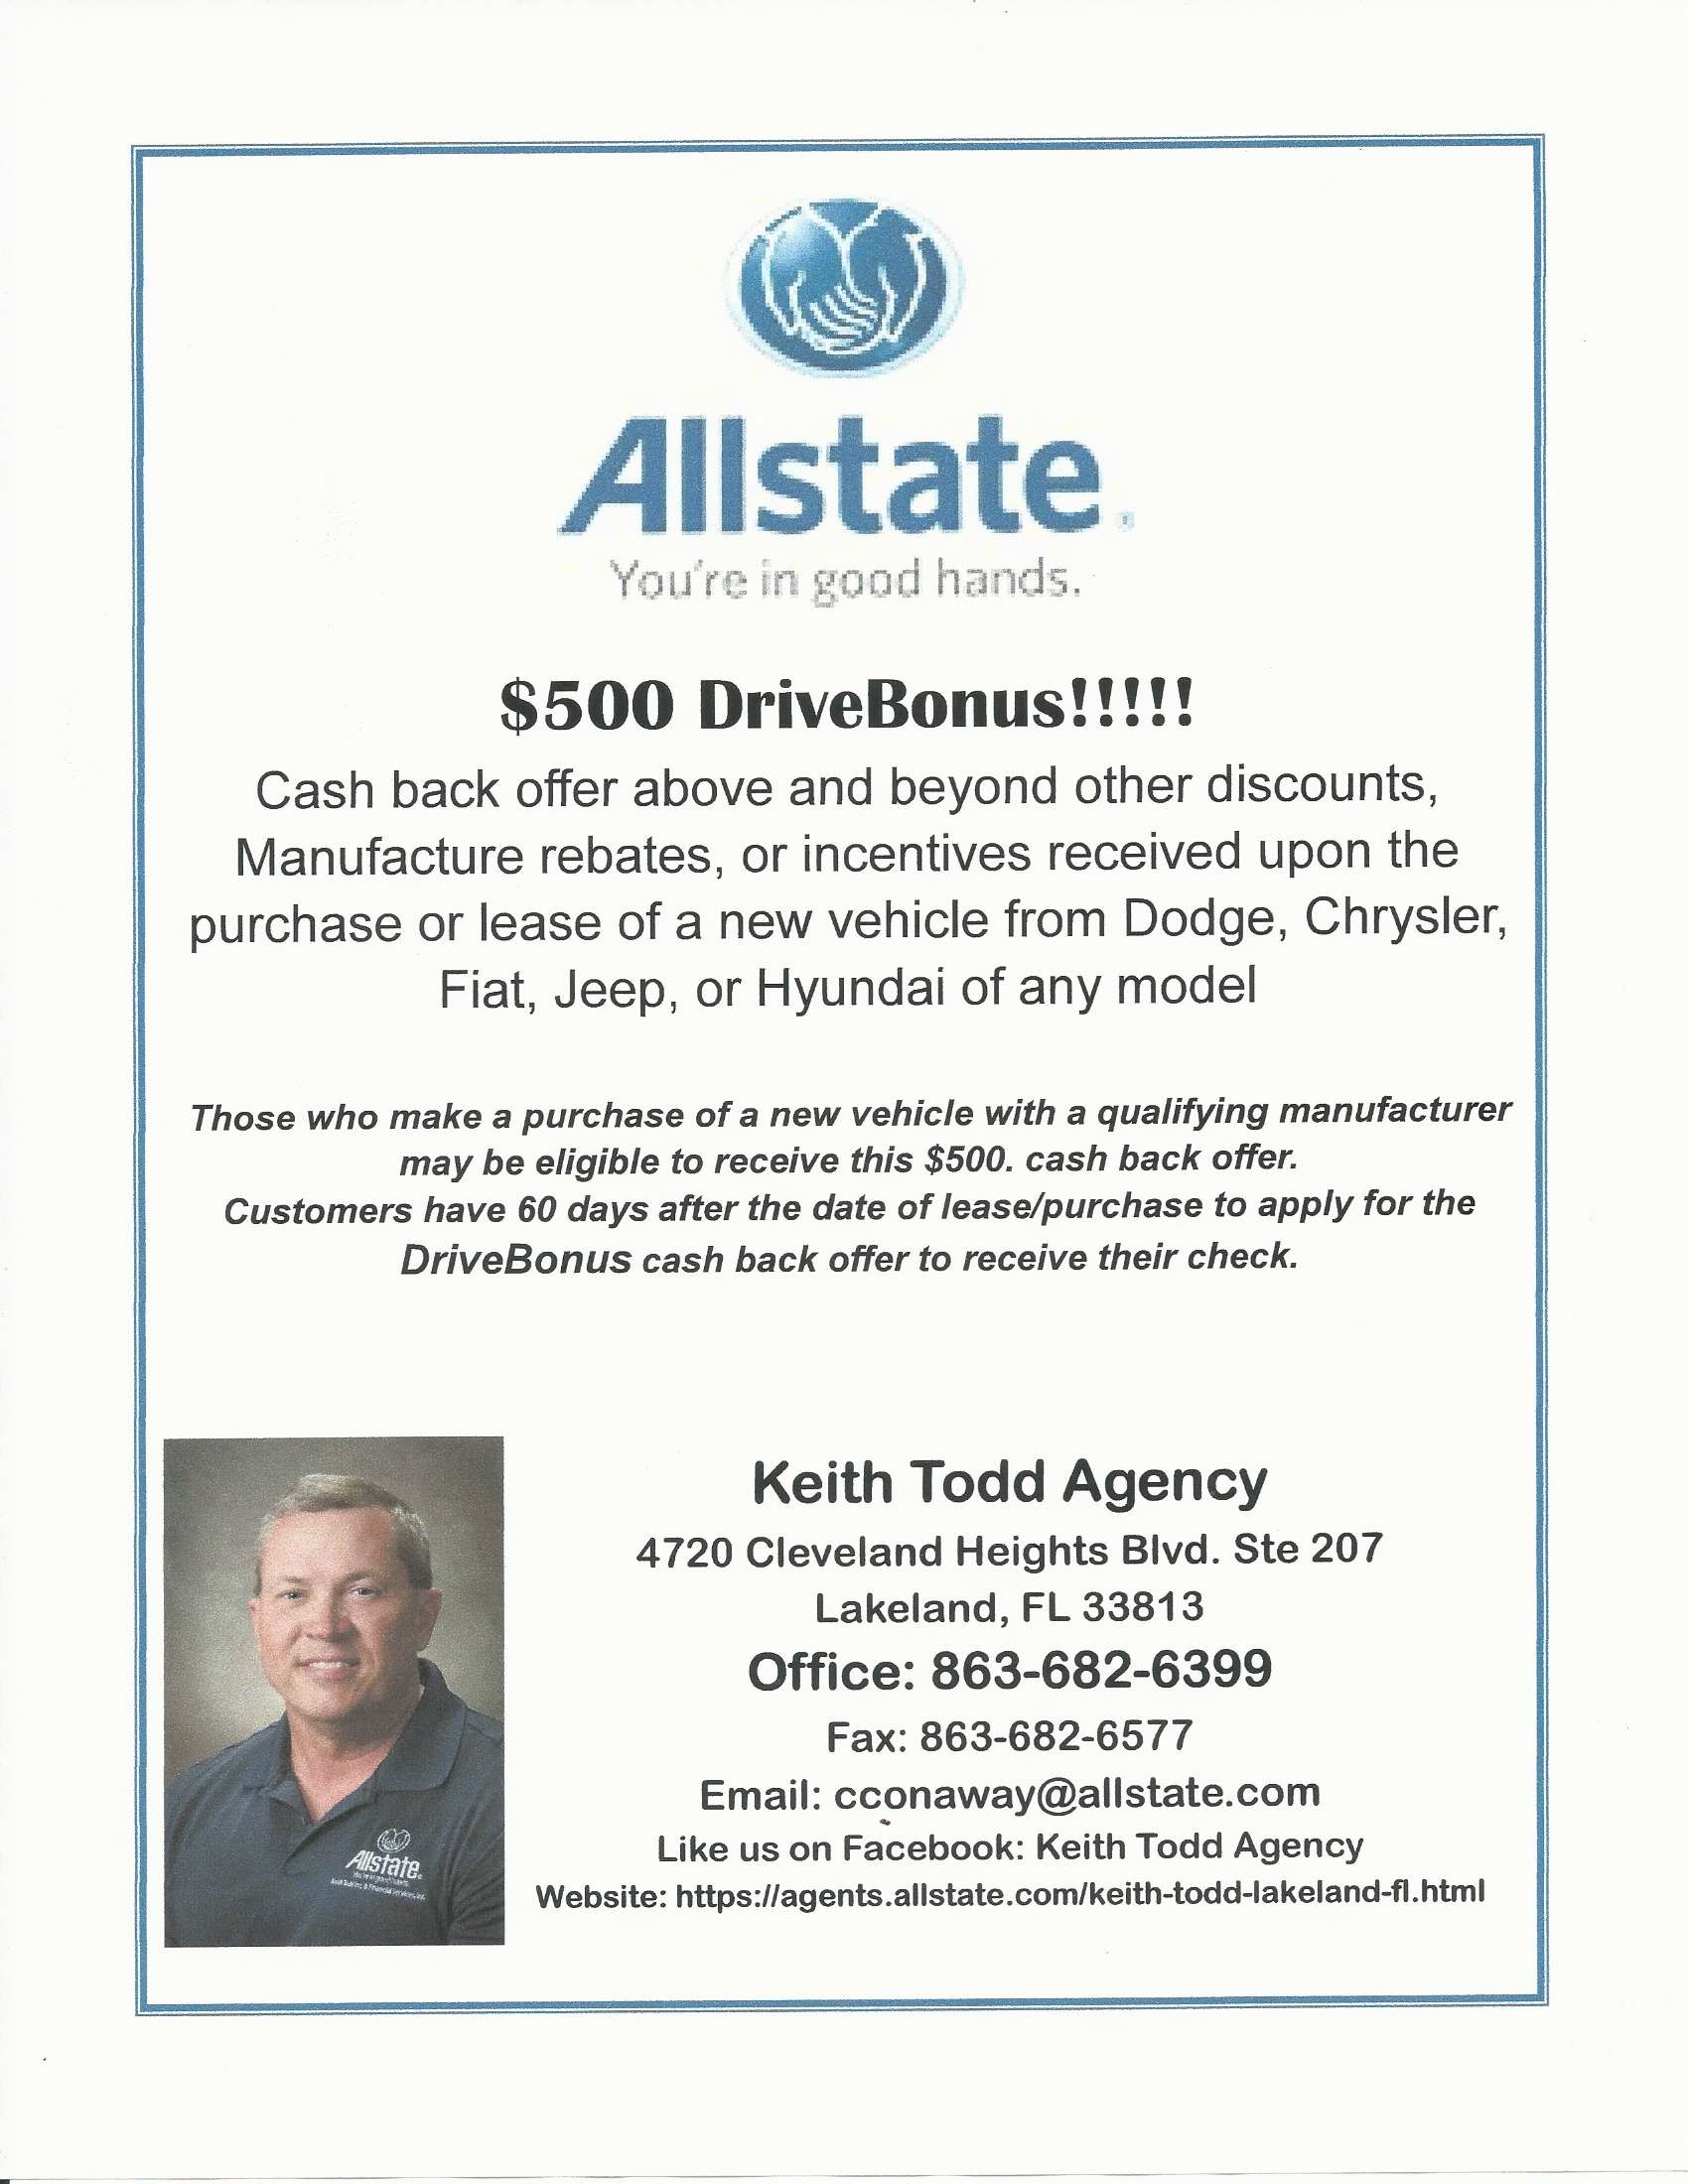 Keith Todd: Allstate Insurance Photo